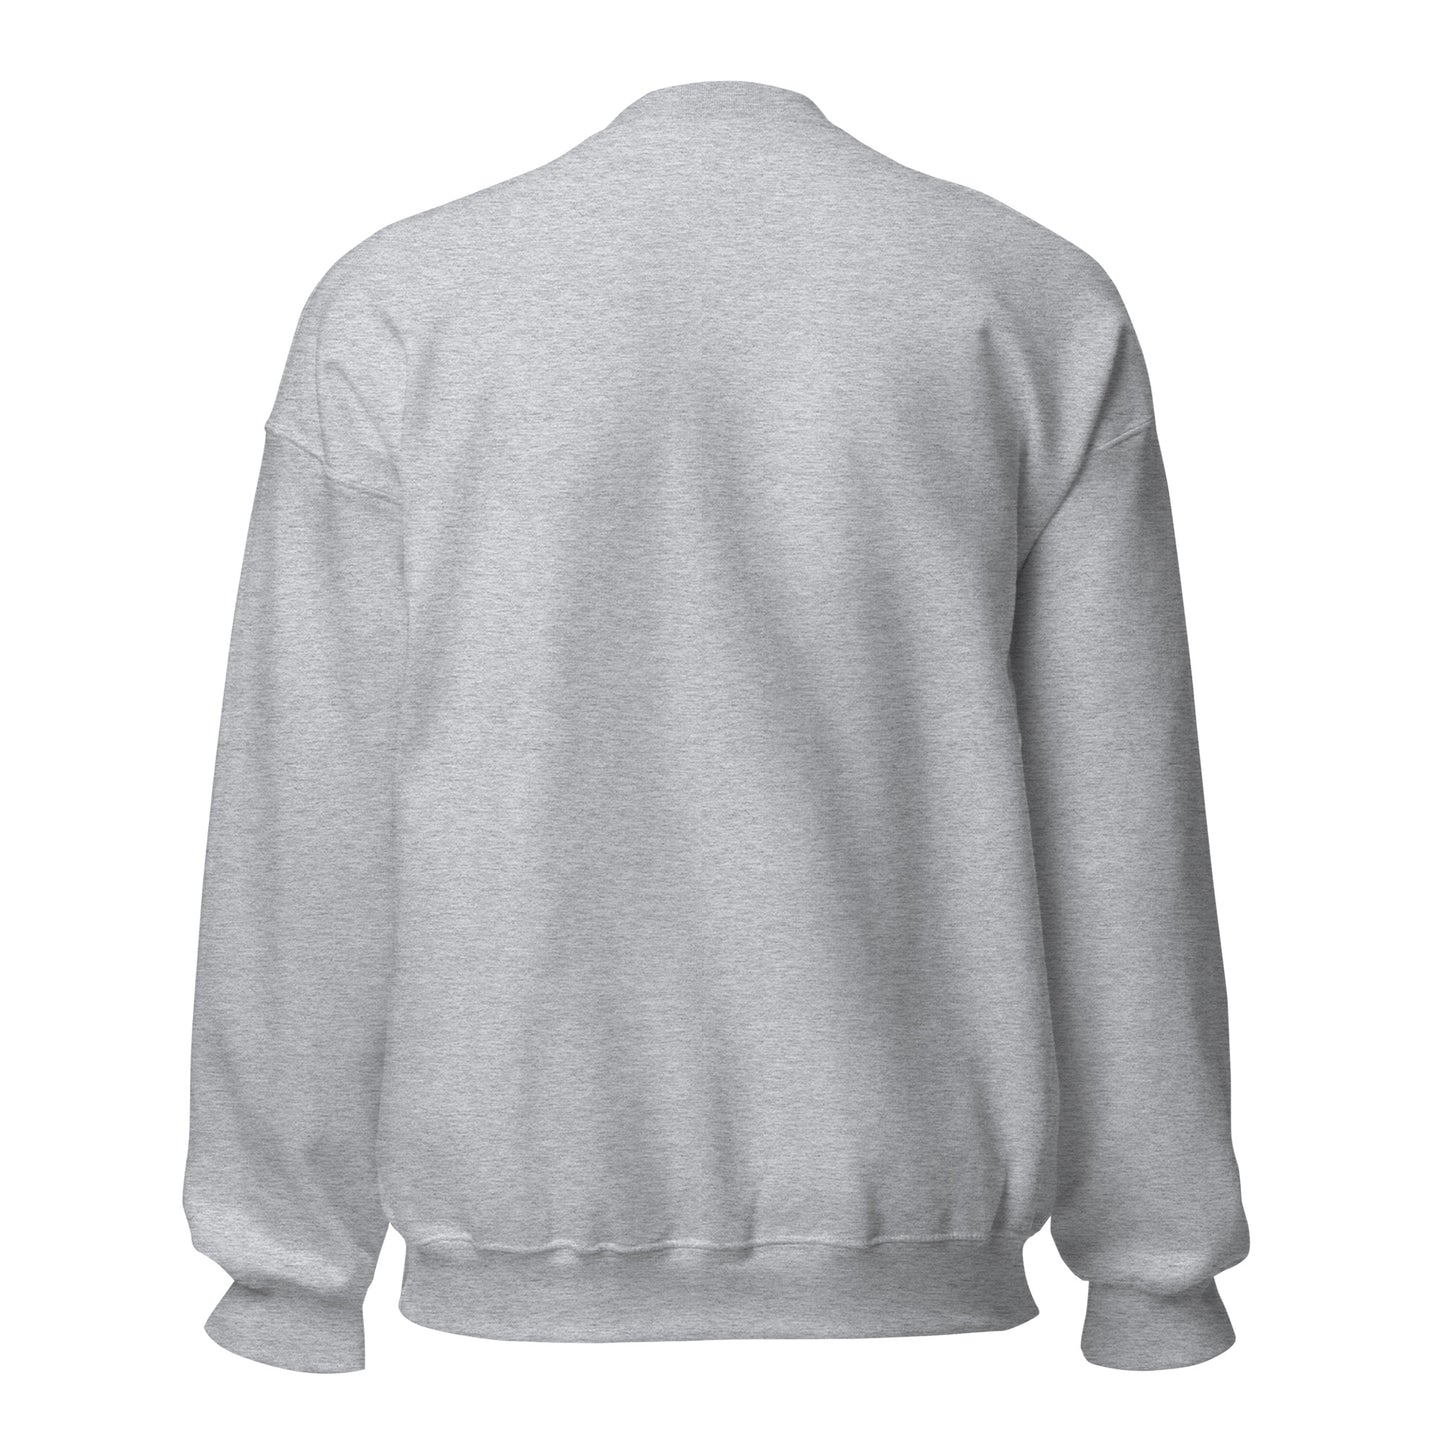 A54 Embroidered Crewneck in Grey